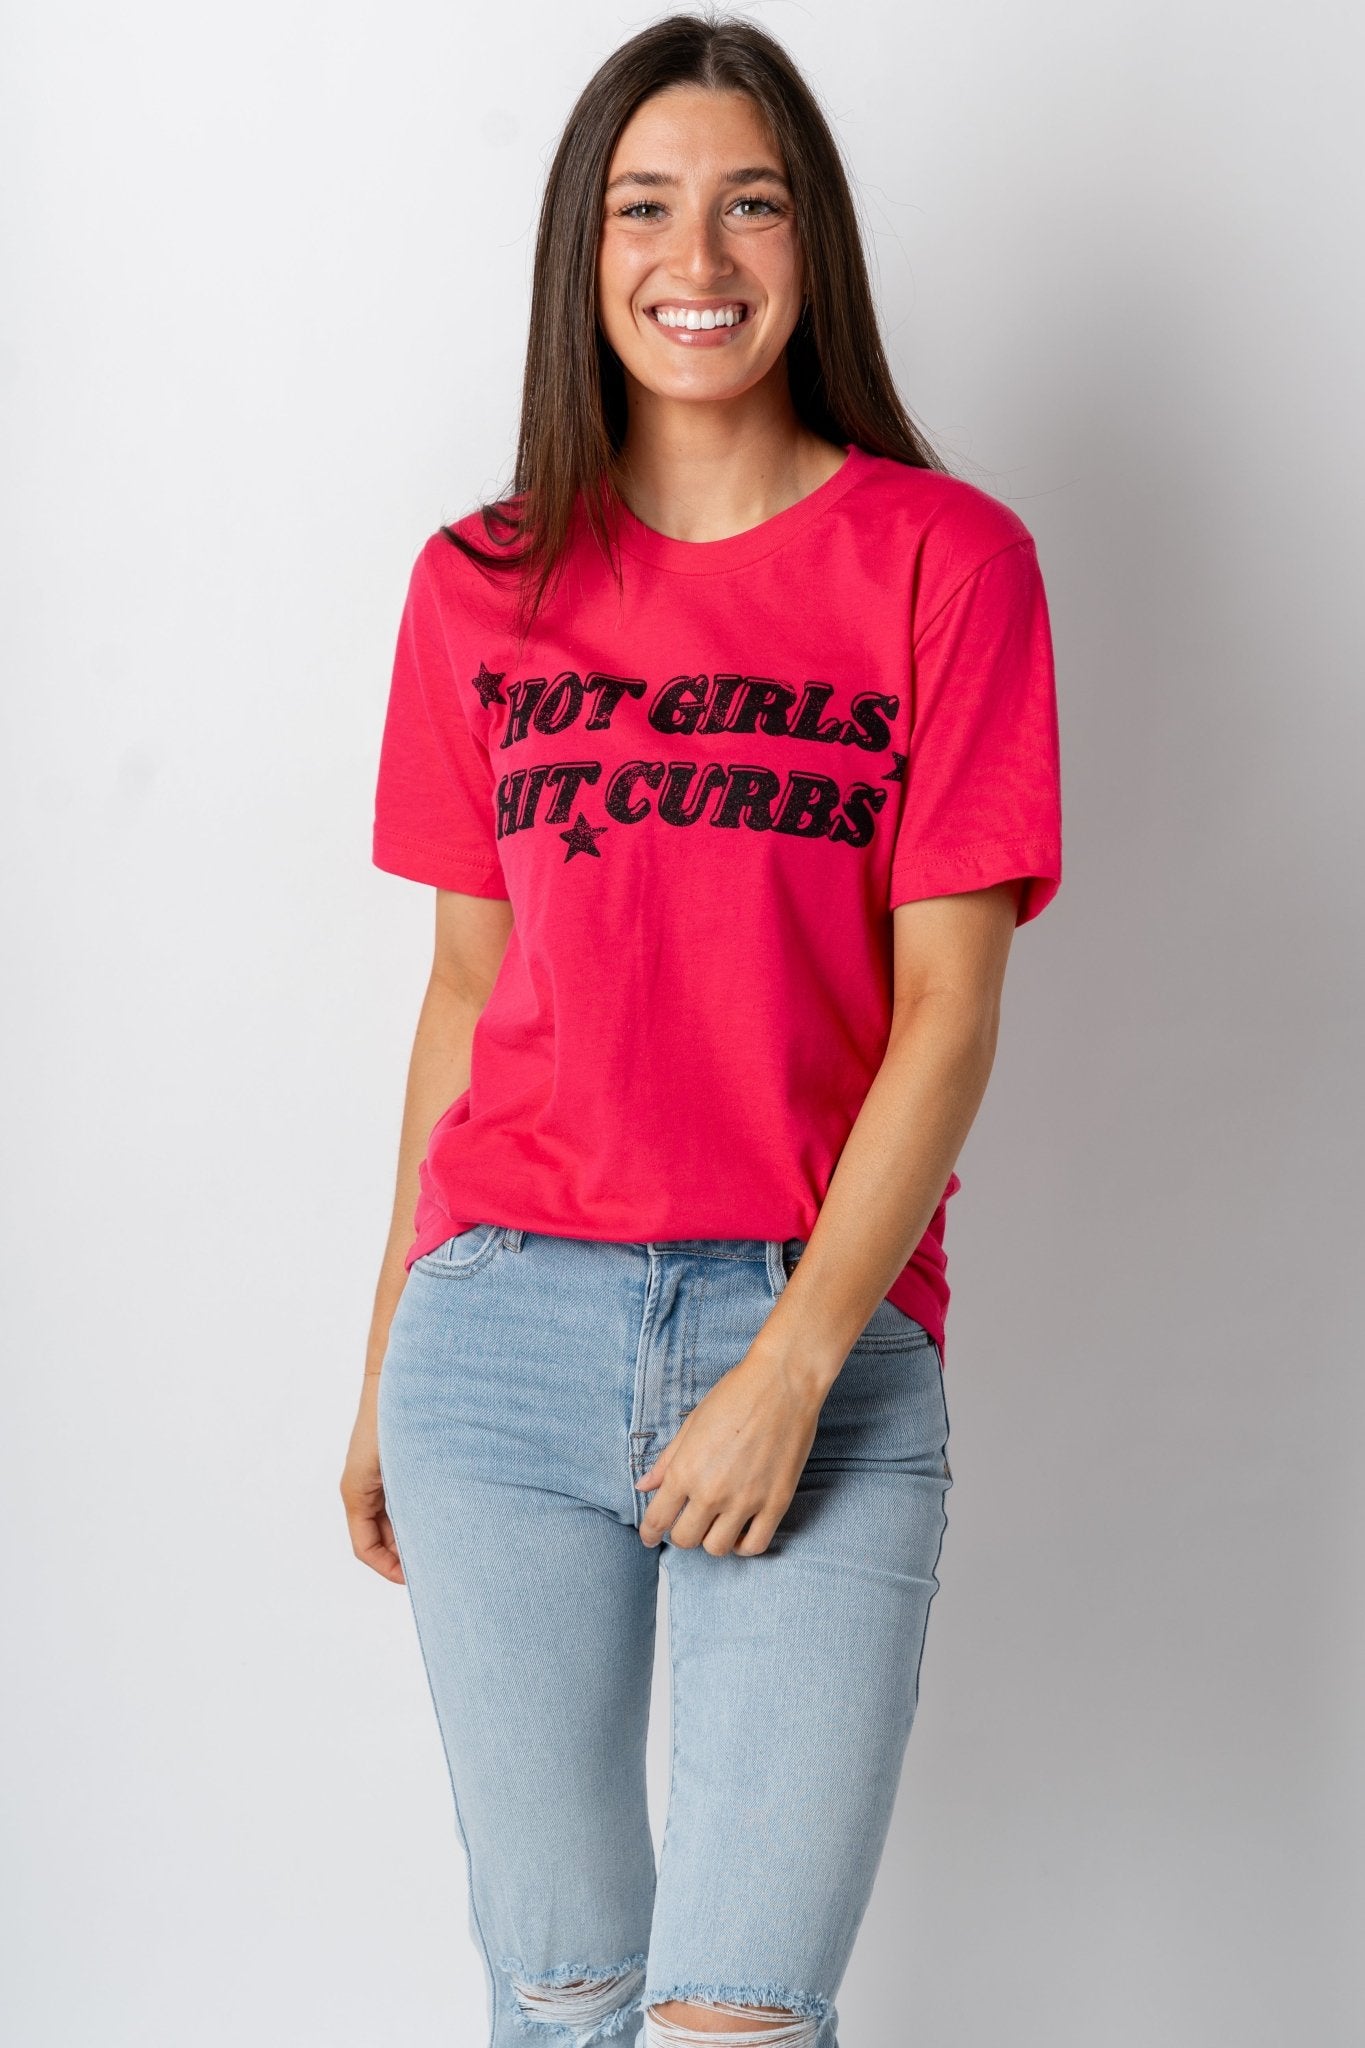 Hot girls hit curbs t-shirt hot pink - Cute t-shirt - Funny T-Shirts at Lush Fashion Lounge Boutique in Oklahoma City